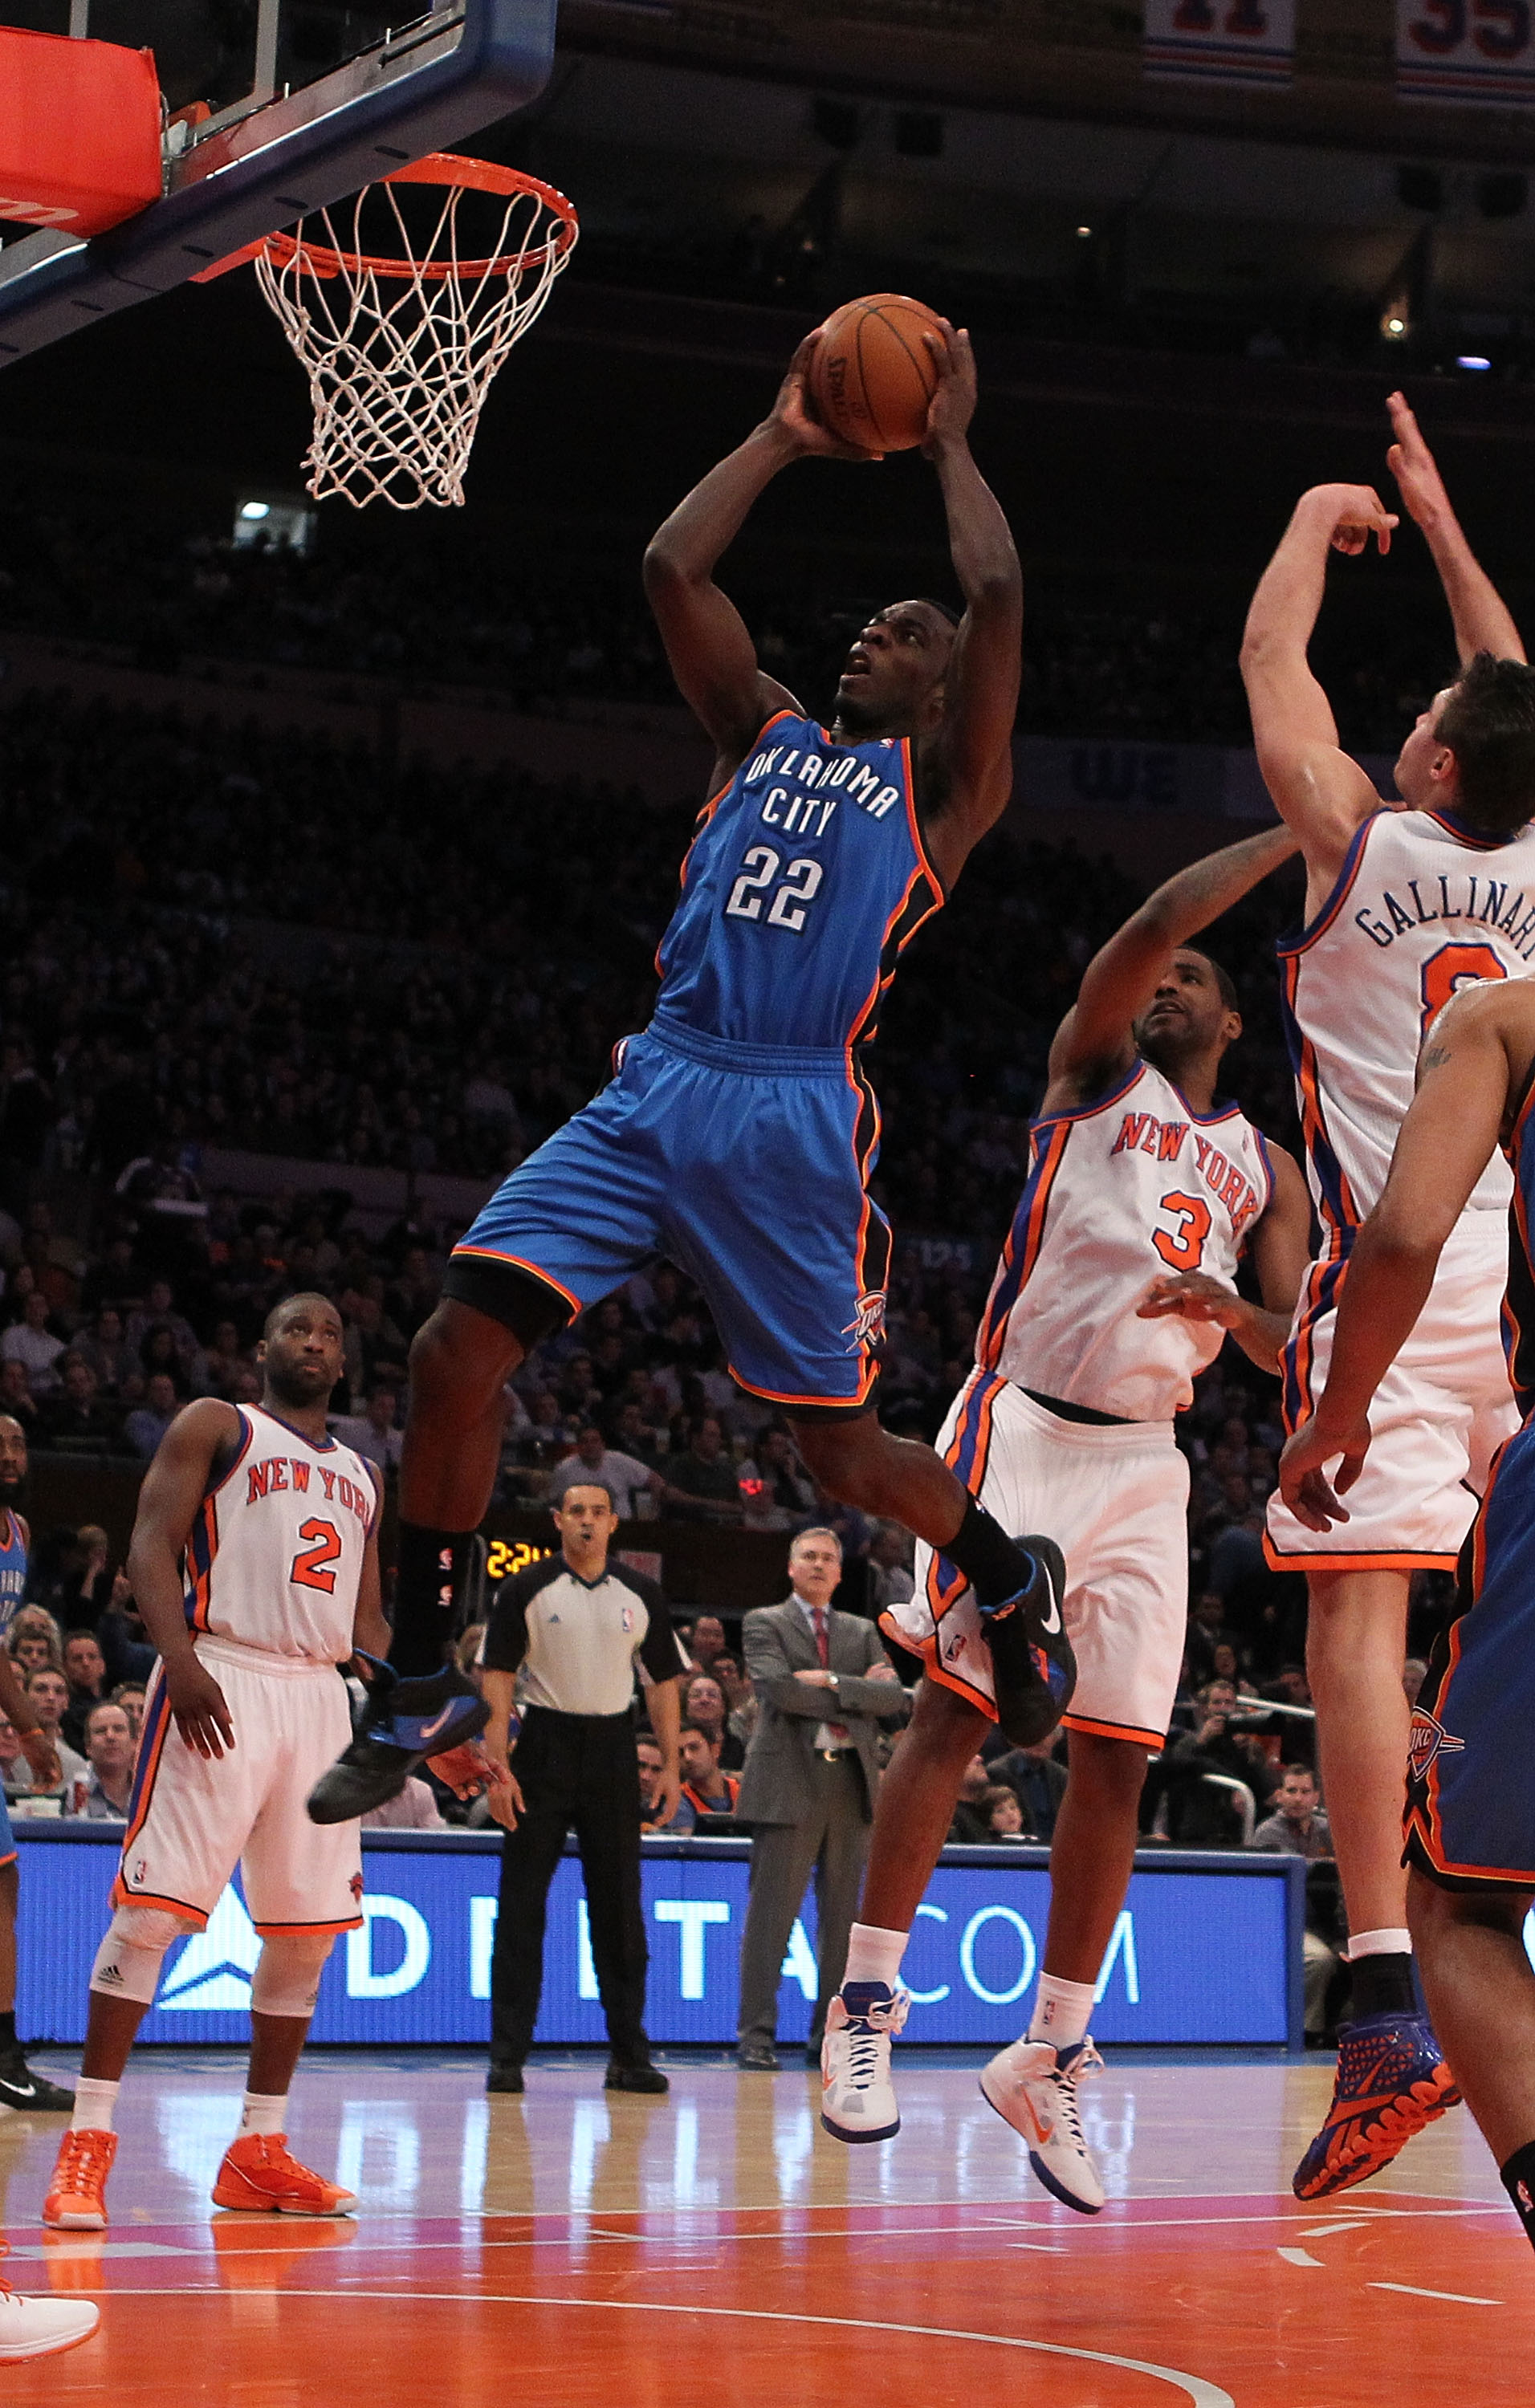 NEW YORK - DECEMBER 22: Jeff Green #22 of the Oklahoma City Thunder in action against the New York Knicks at Madison Square Garden on December 22, 2010 in New York, New York.   NOTE TO USER: User expressly acknowledges and agrees that, by downloading and/